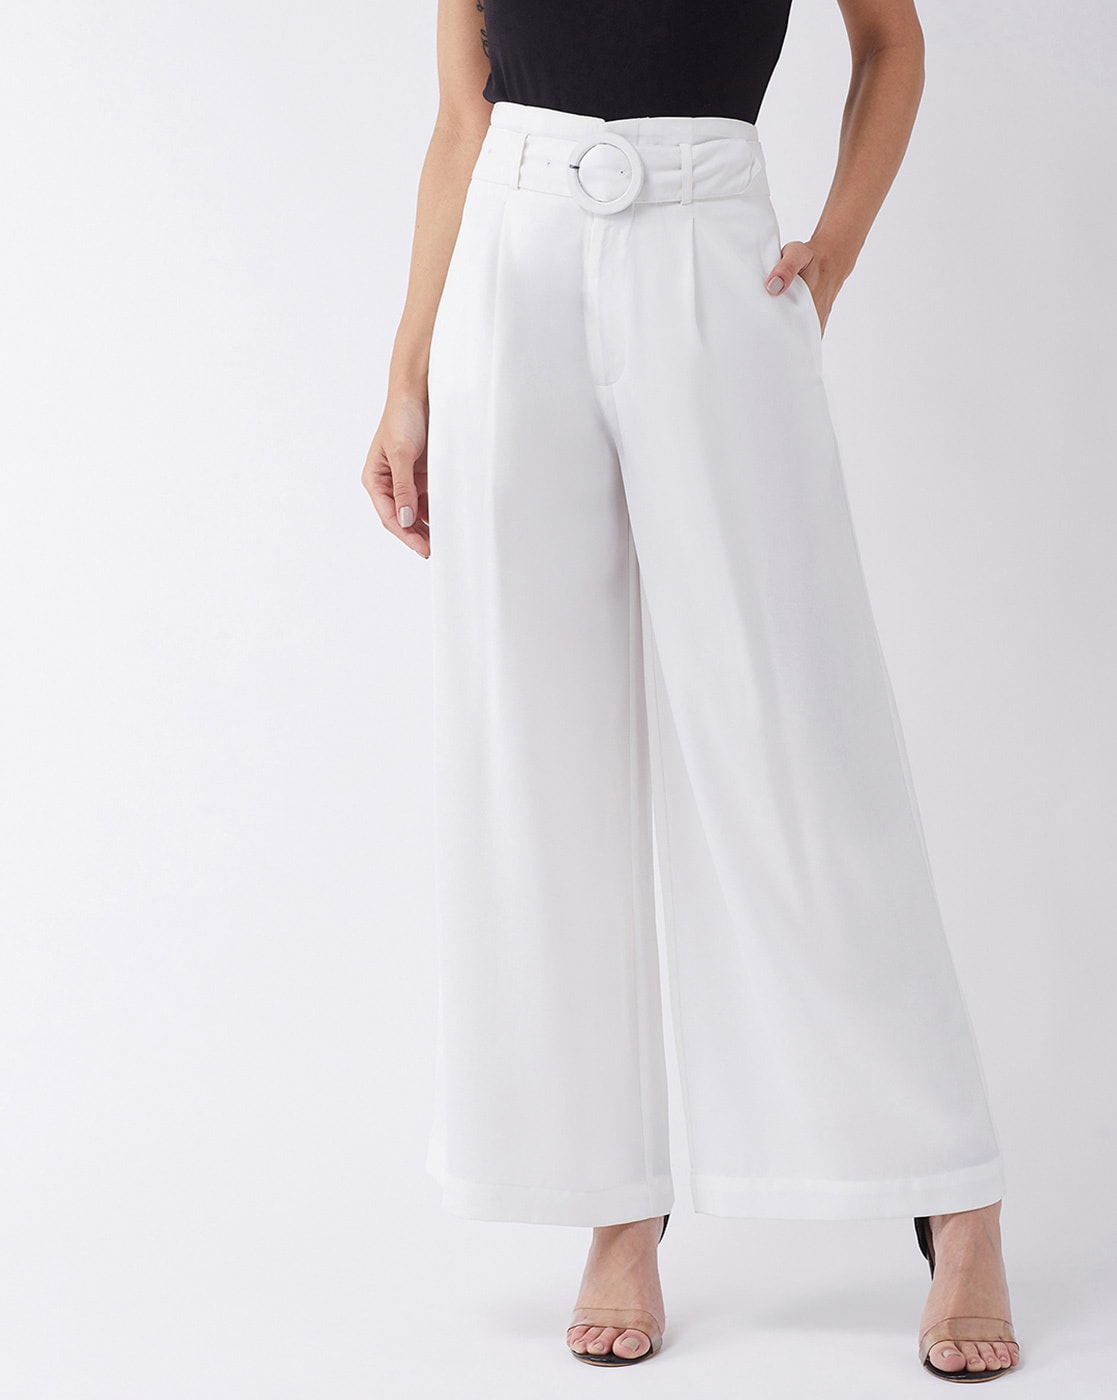 Collection more than 116 white wide leg trousers best